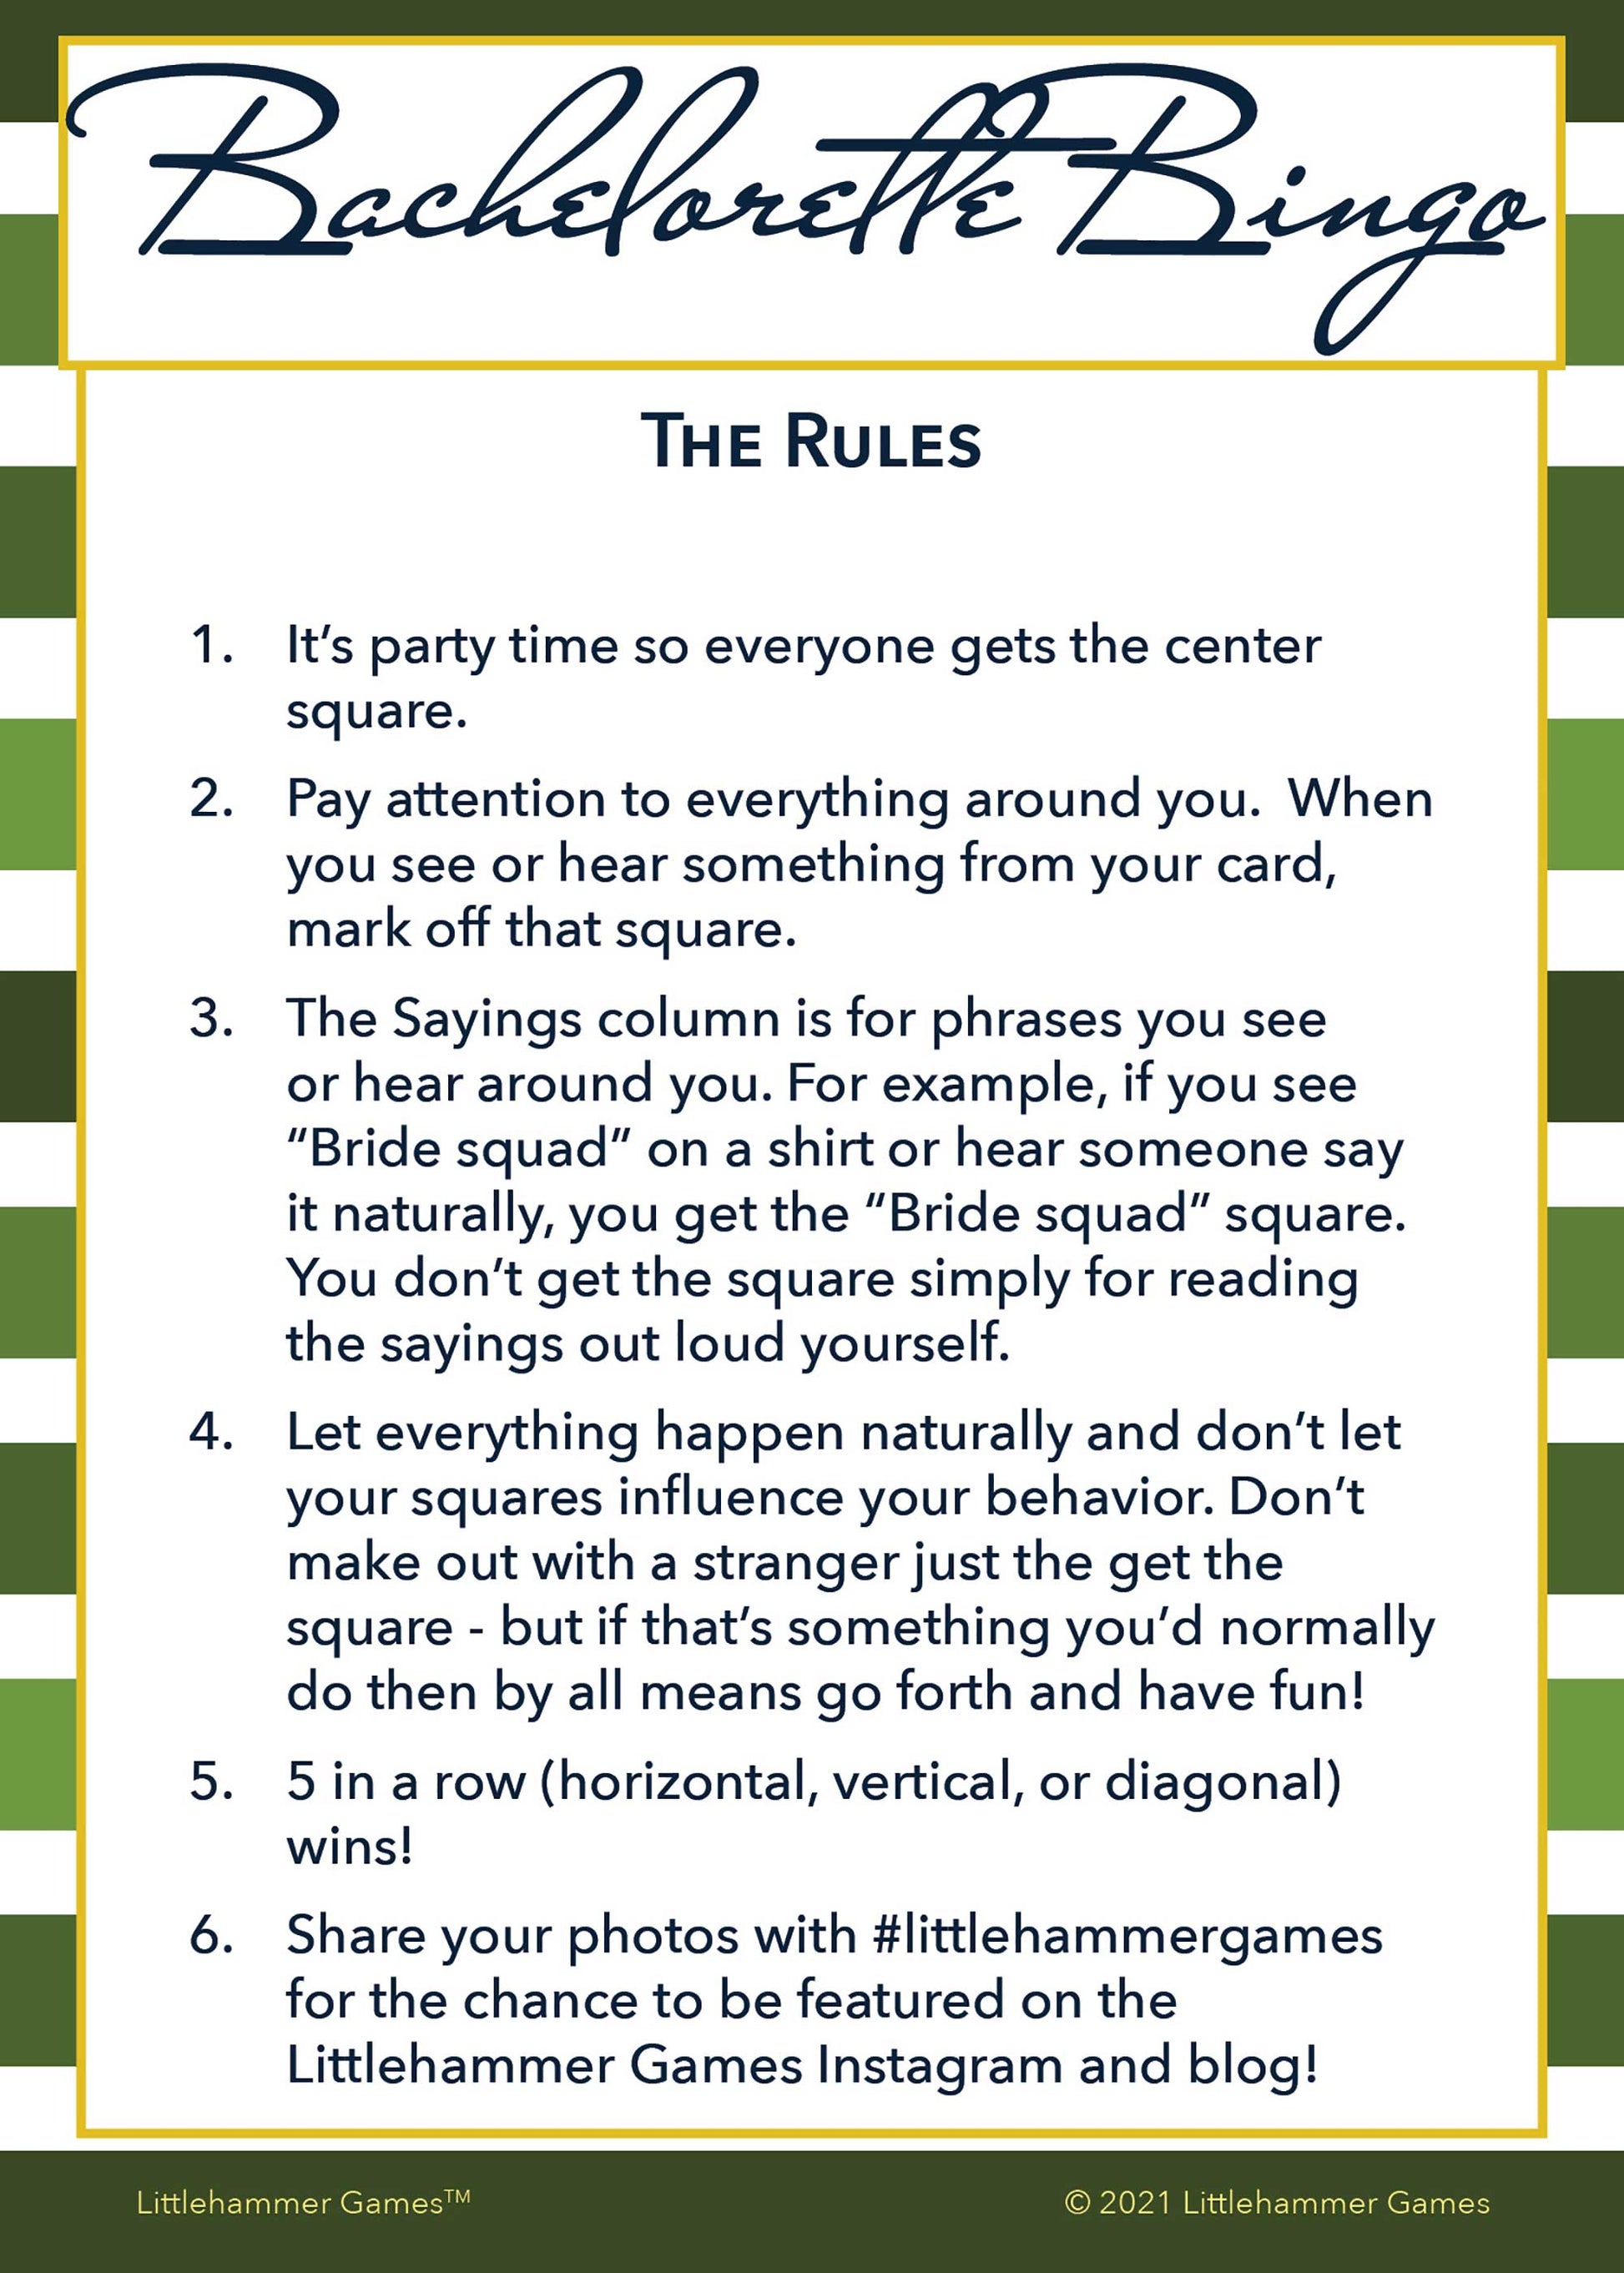 Bachelorette Bingo rules card with a green-striped background